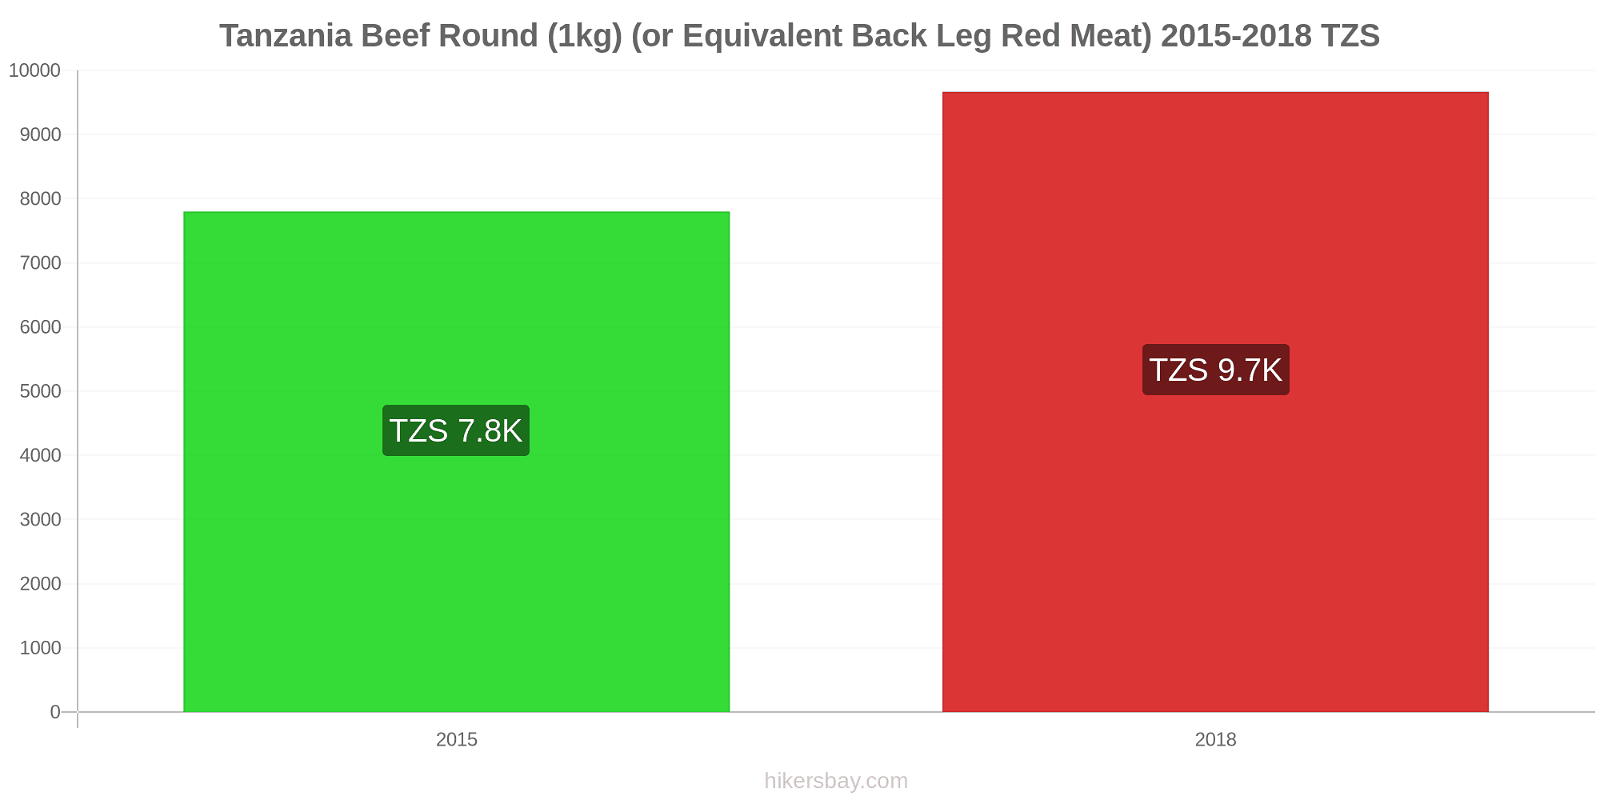 Tanzania price changes Beef (1kg) (or similar red meat) hikersbay.com